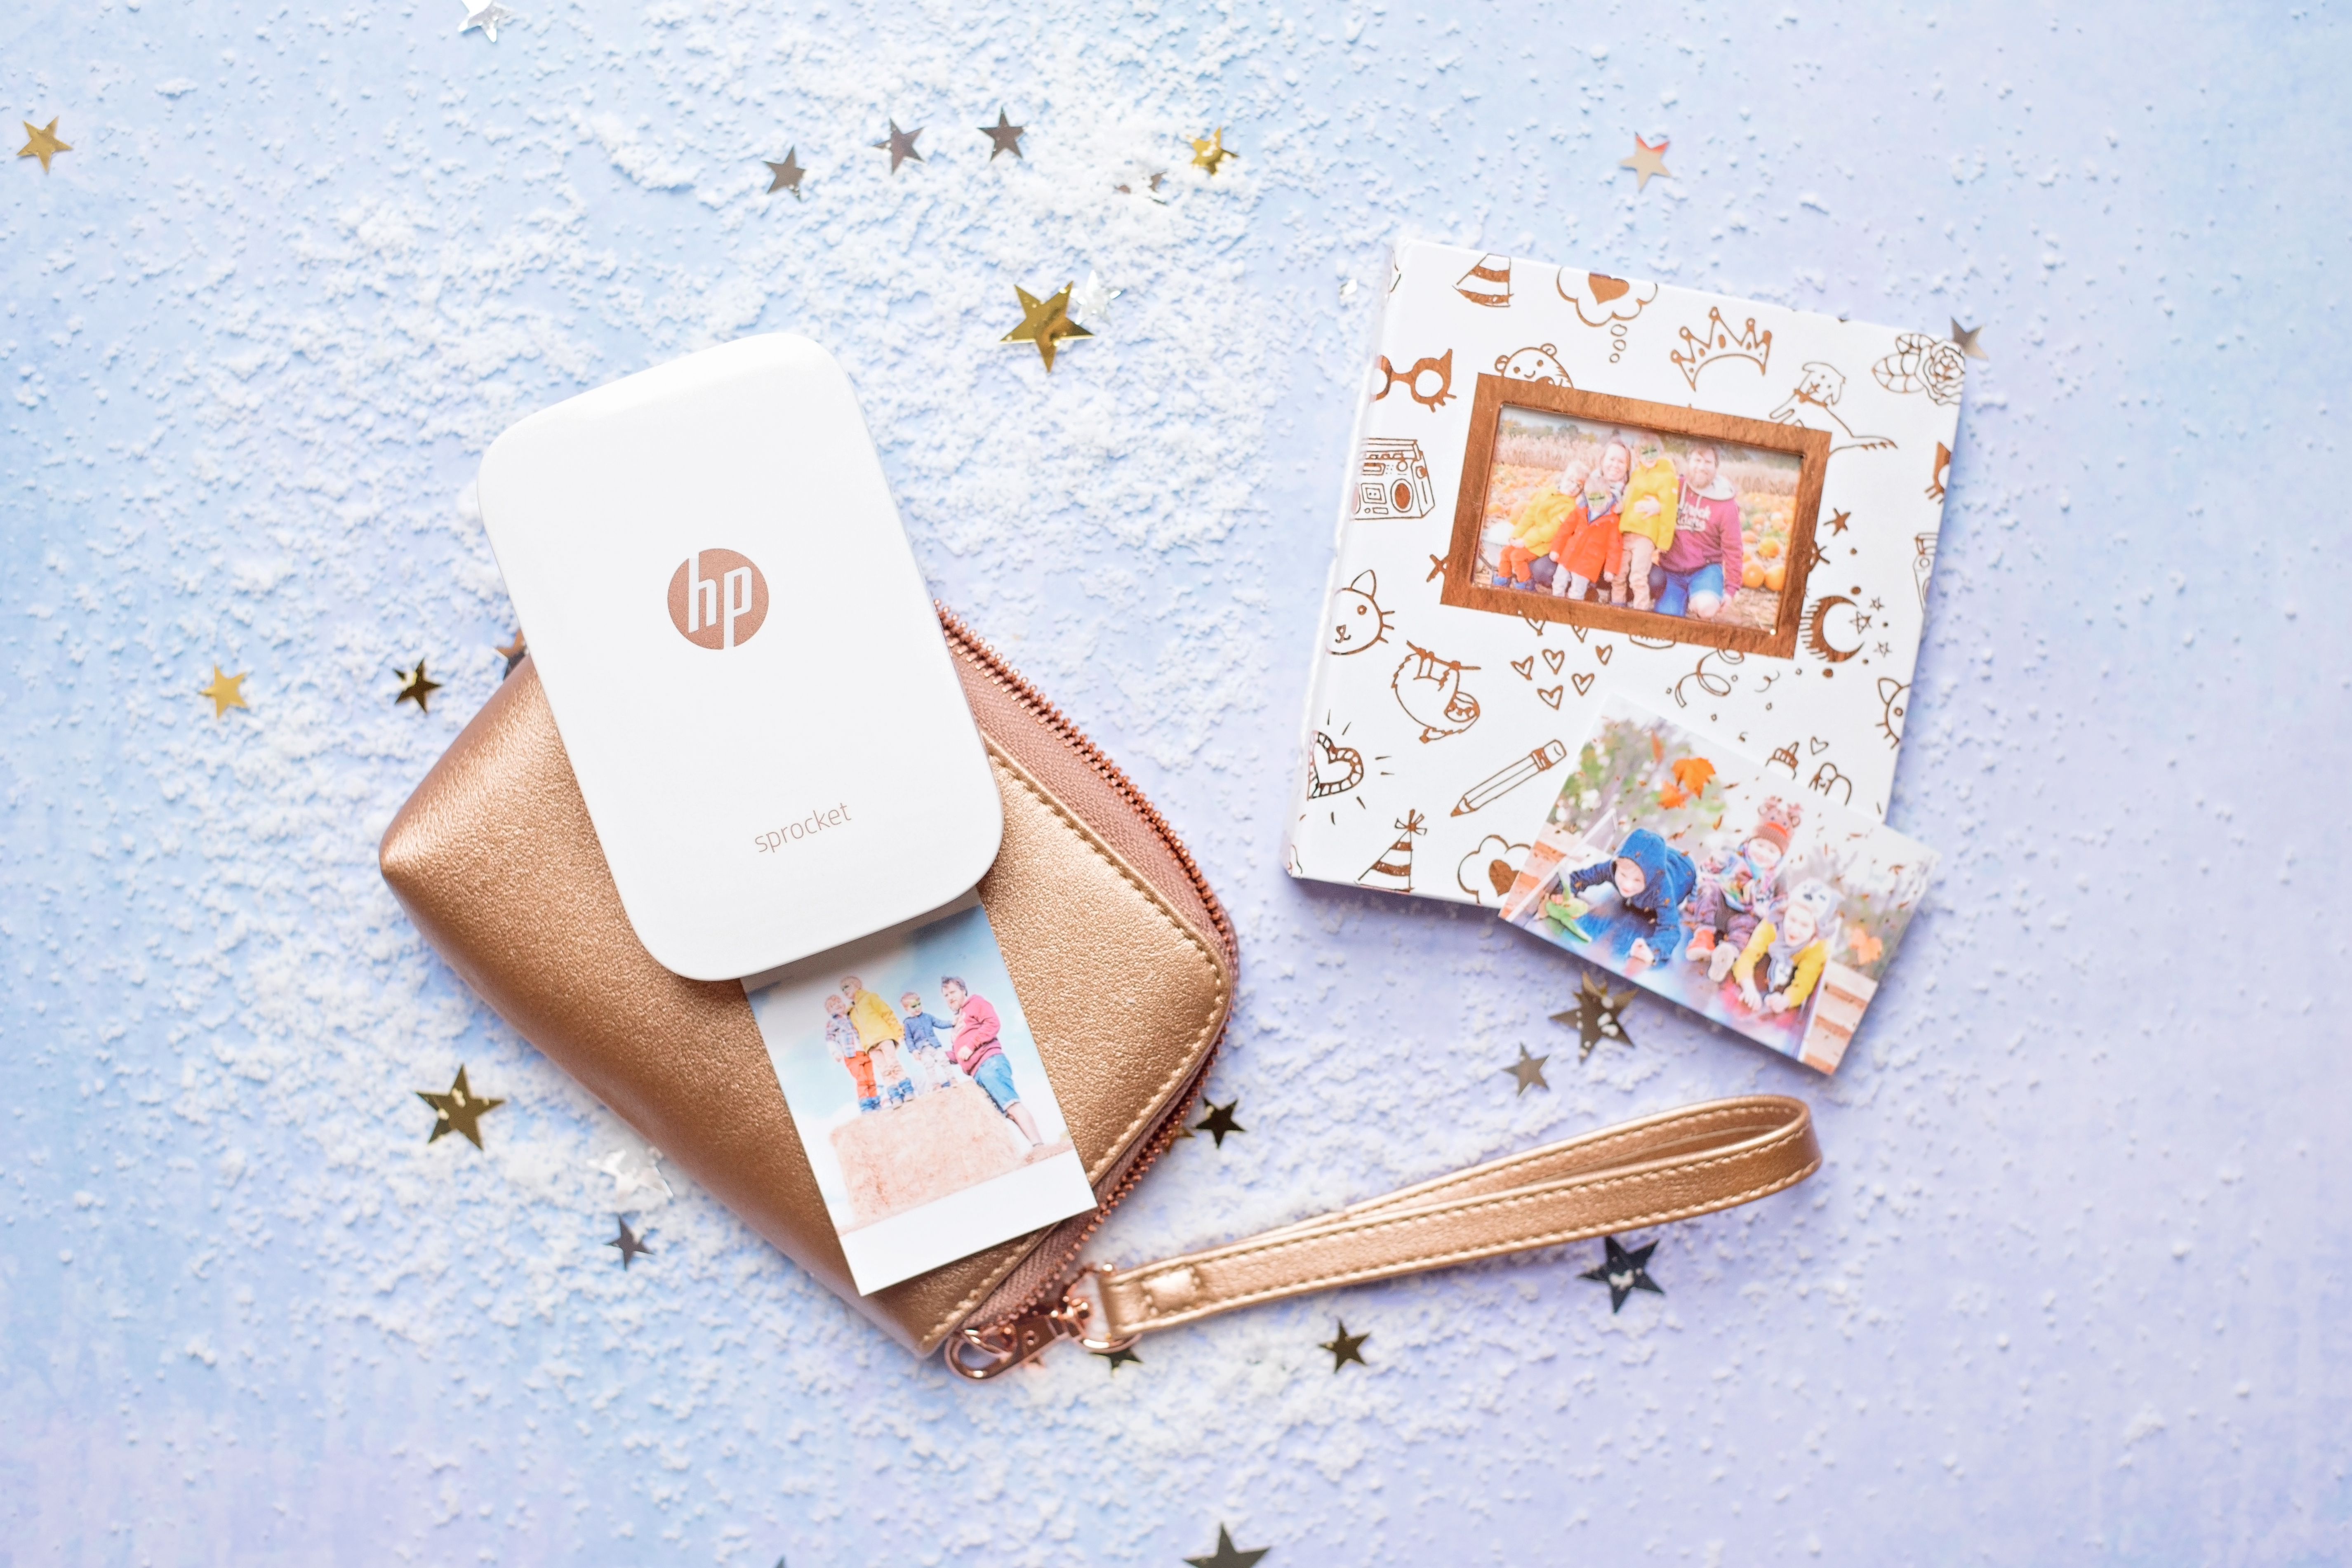 DON’T FEAR THE HUMMINGBIRD… THE HP SPROCKET PHOTO PRINTER LIMITED EDITION BUNDLE REVIEW